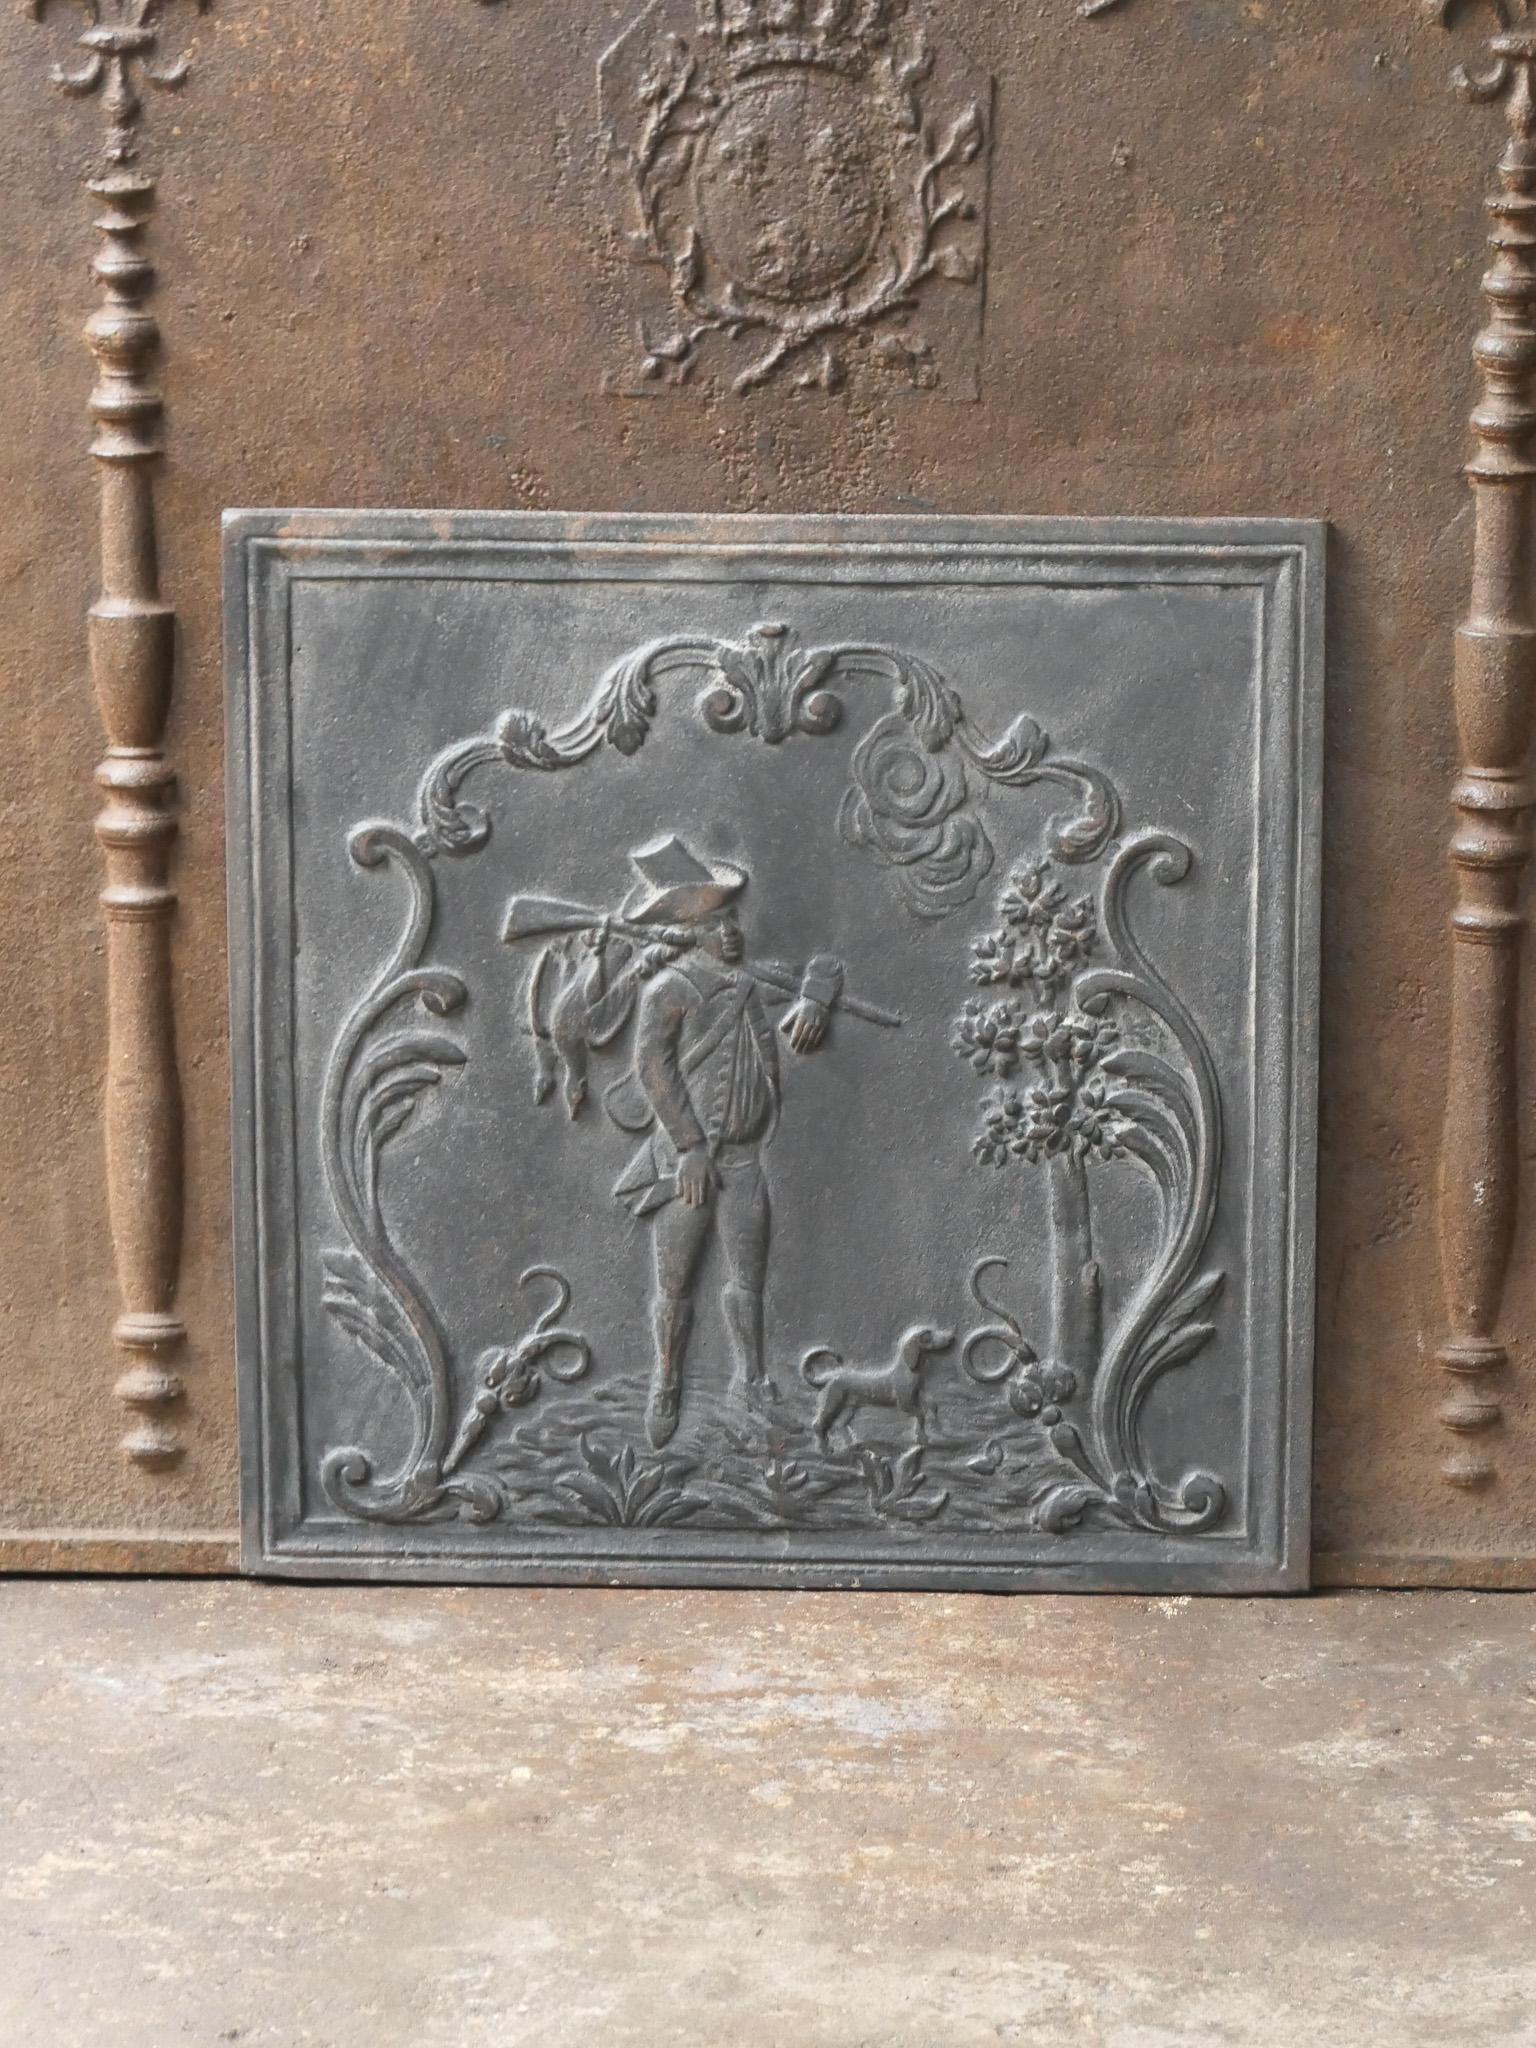 20th century French Napoleon III style fireback with a scene of a hunt returning.

The fireback is made of cast iron and has a black / pewter patina. The fireback is in a good condition and does not have cracks.







